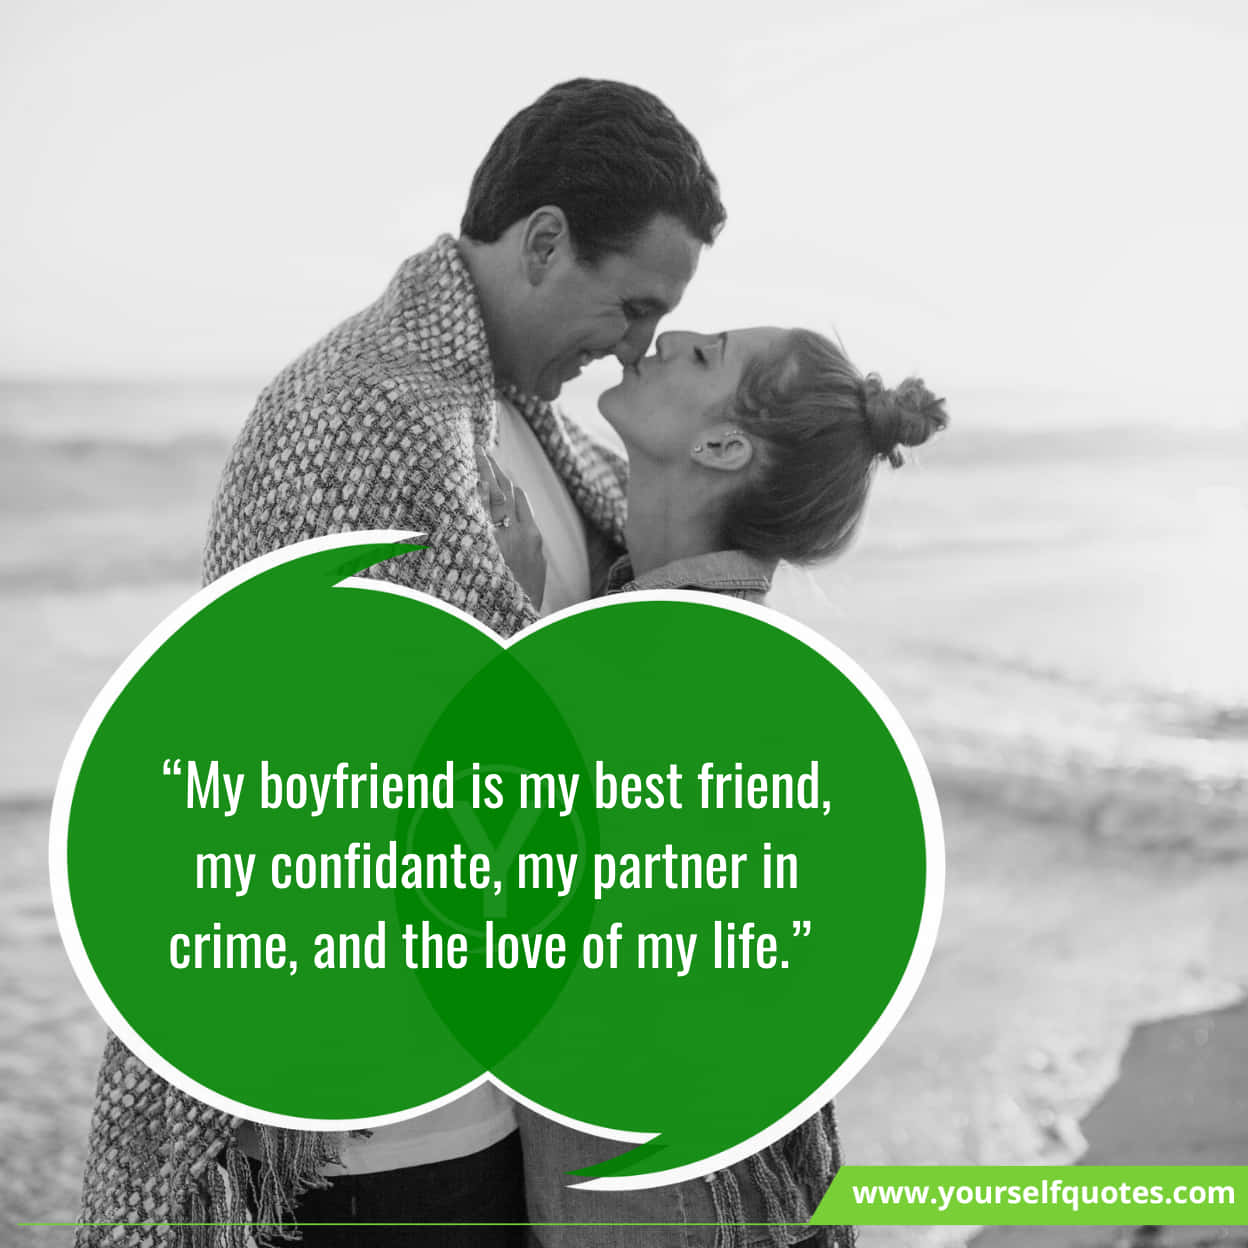 National Boyfriend Day Quotes, Wishes, History, Significance